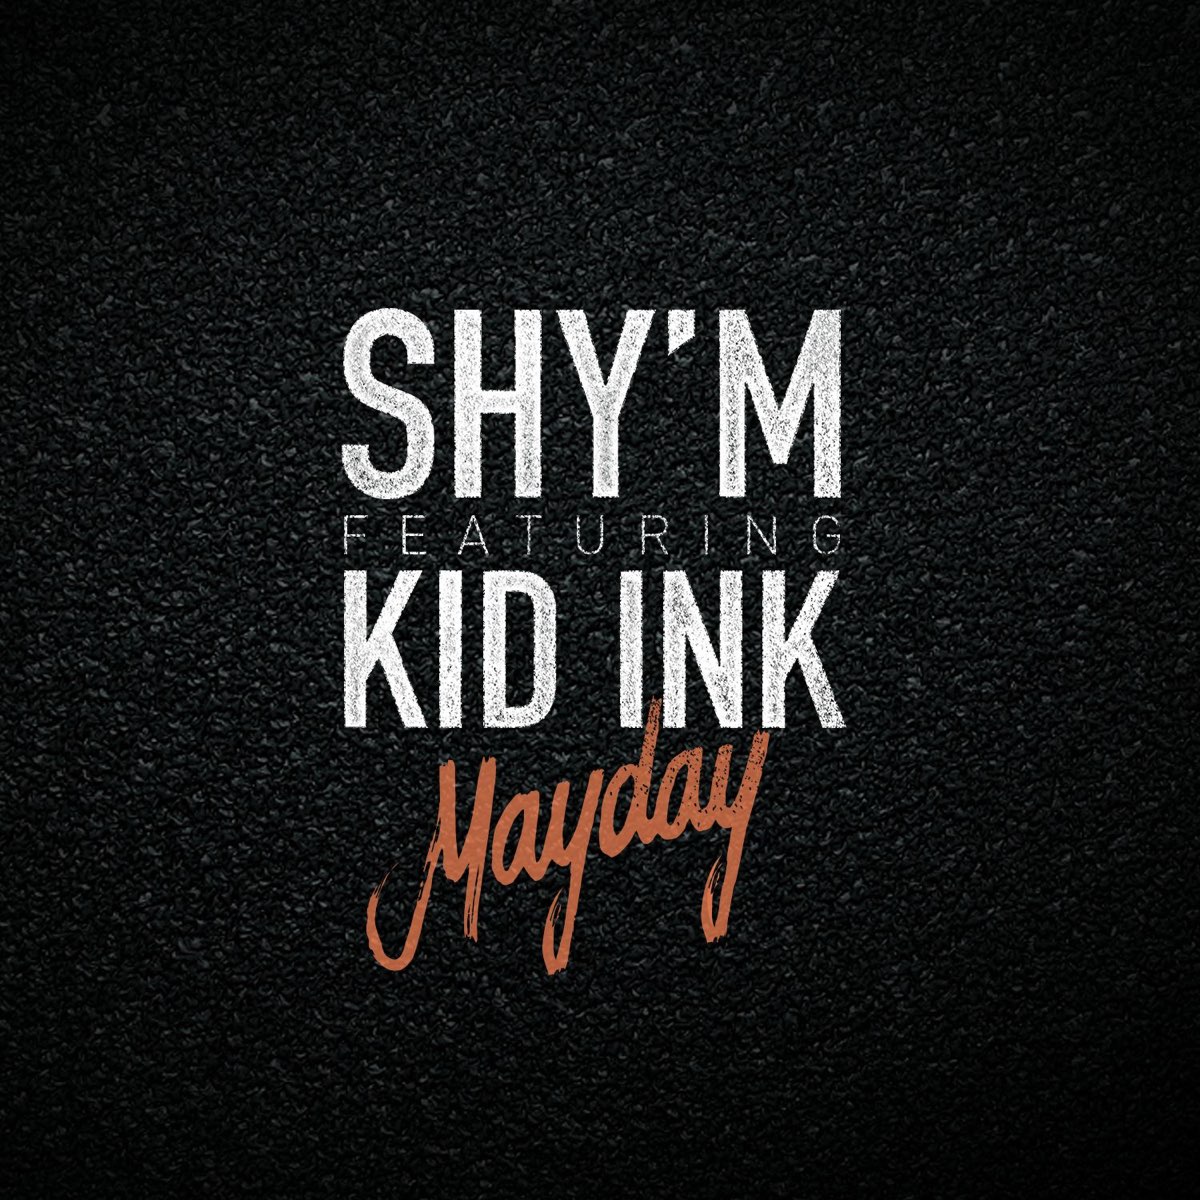 Your Song Lyrics Mayday. Feat kid ink